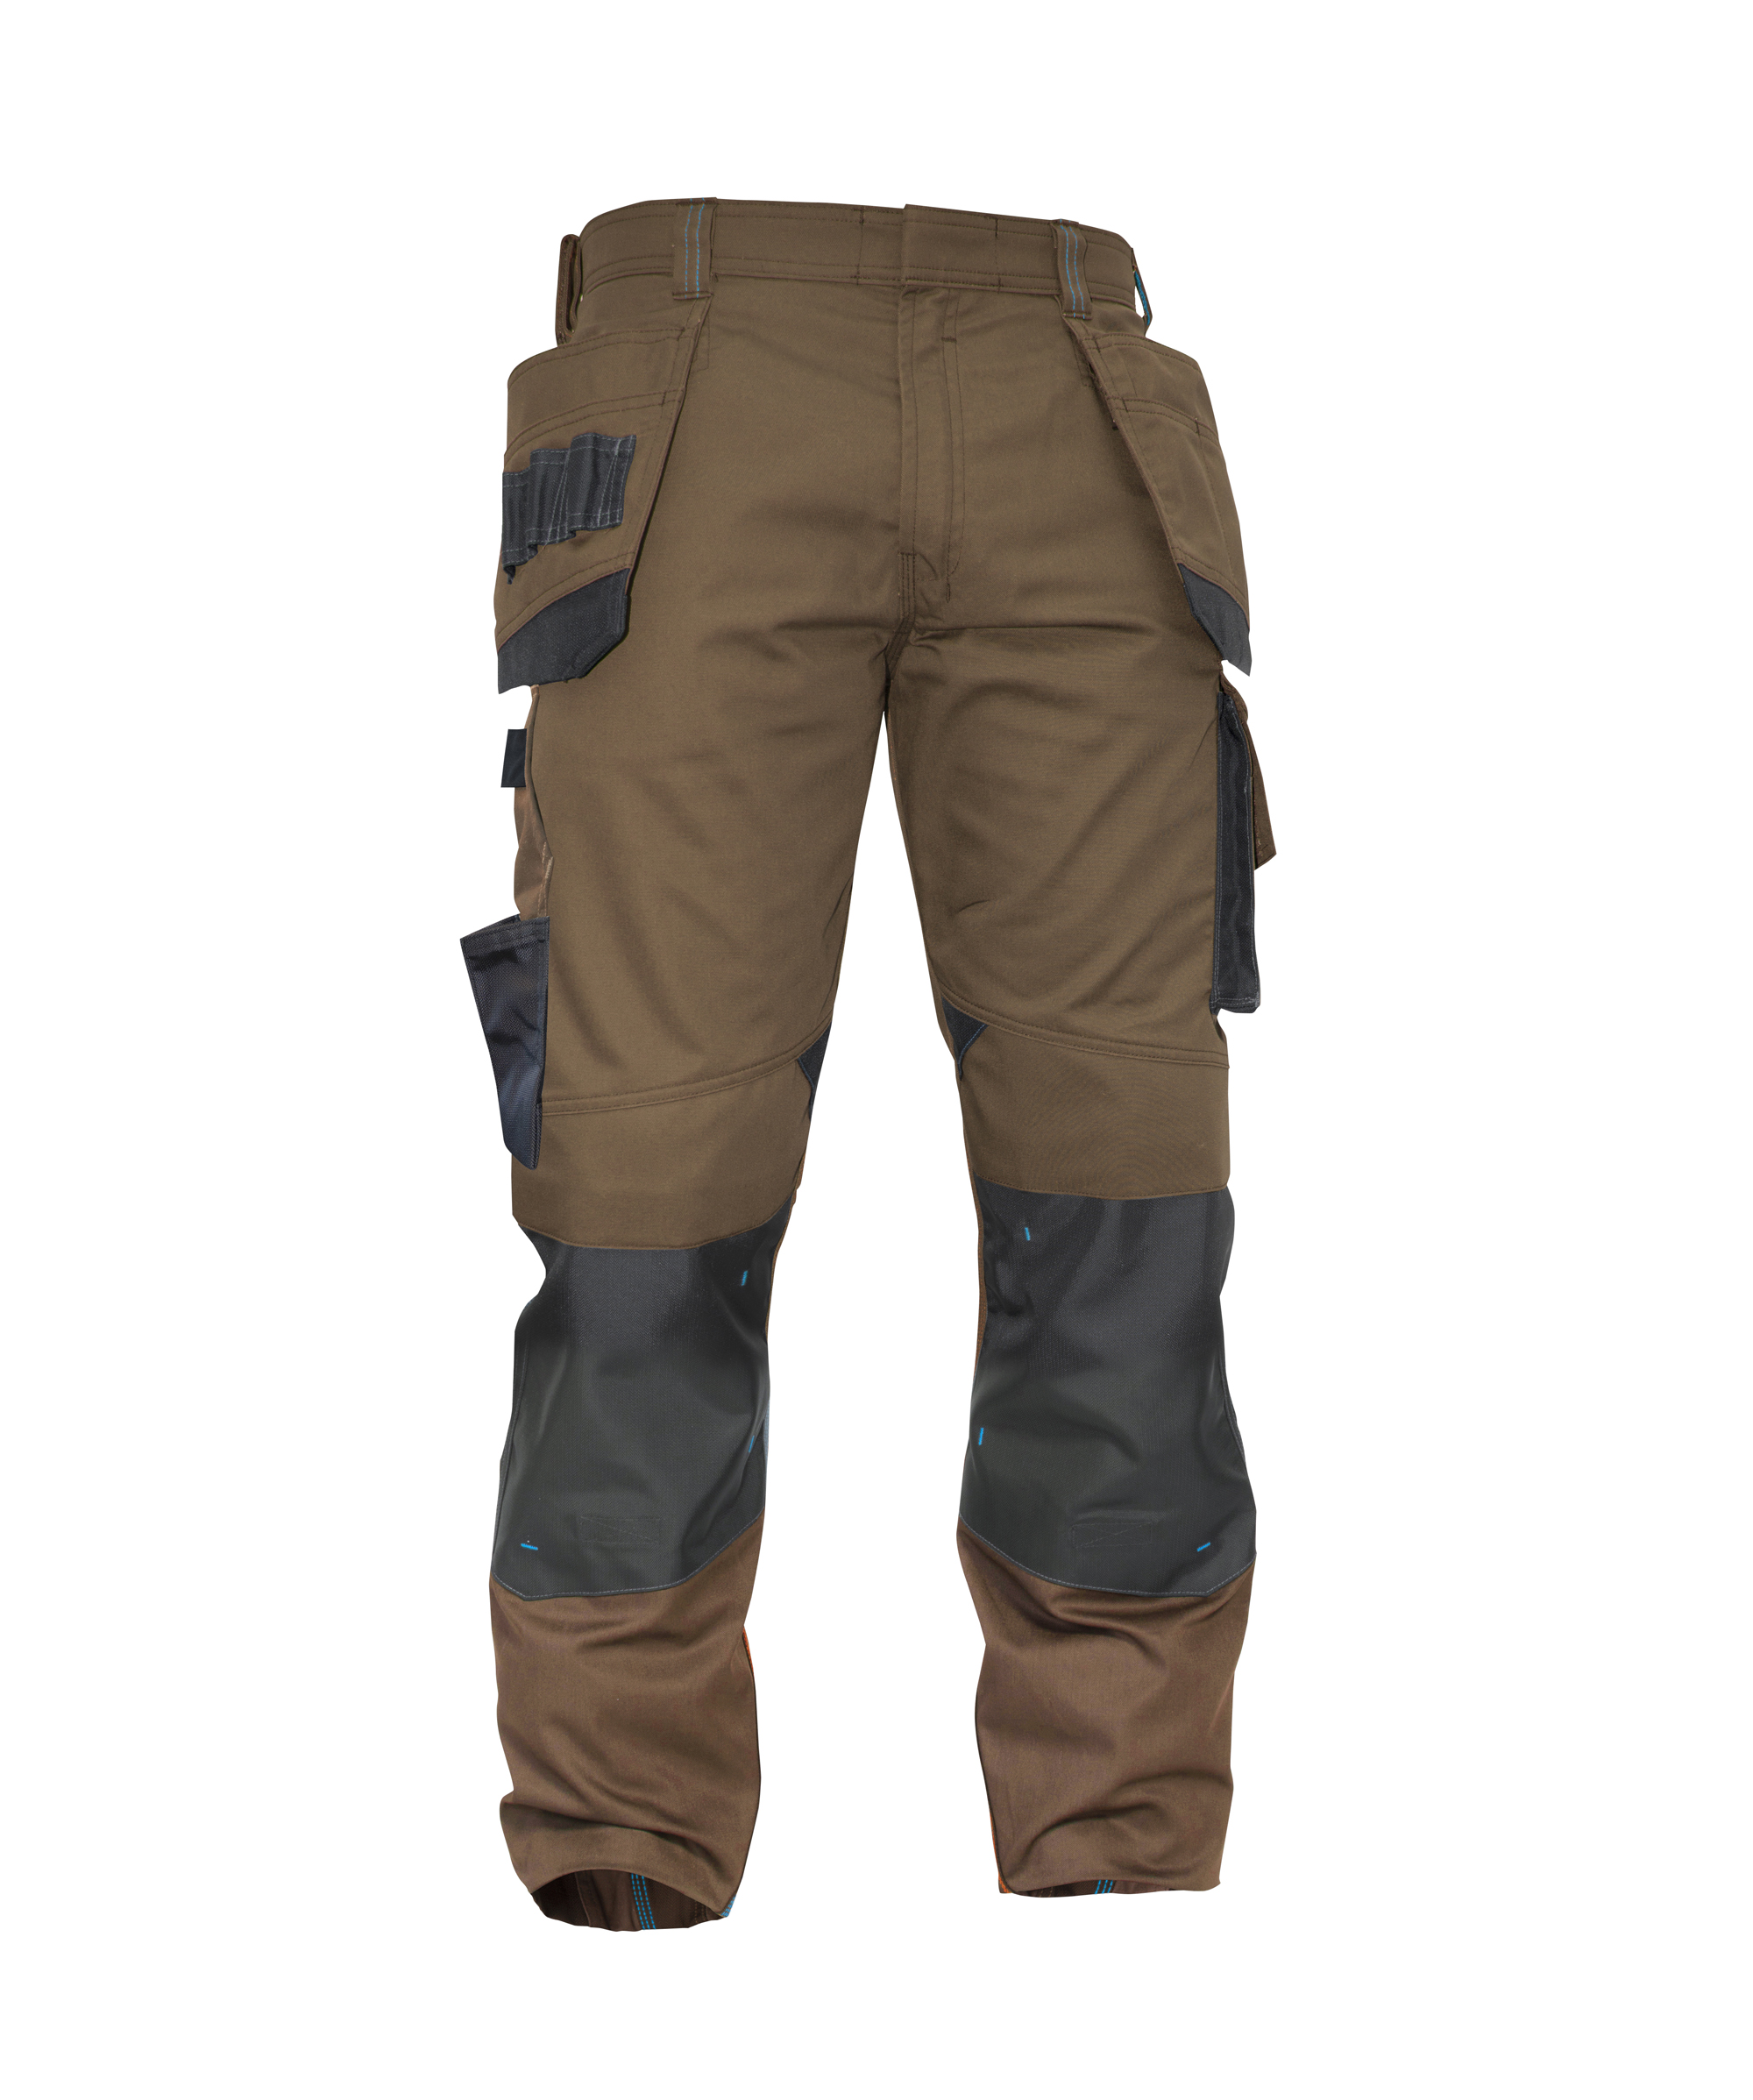 magnetic_two-tone-work-trousers-with-multi-pockets-and-knee-pockets_clay-brown-anthracite-grey_front.jpg